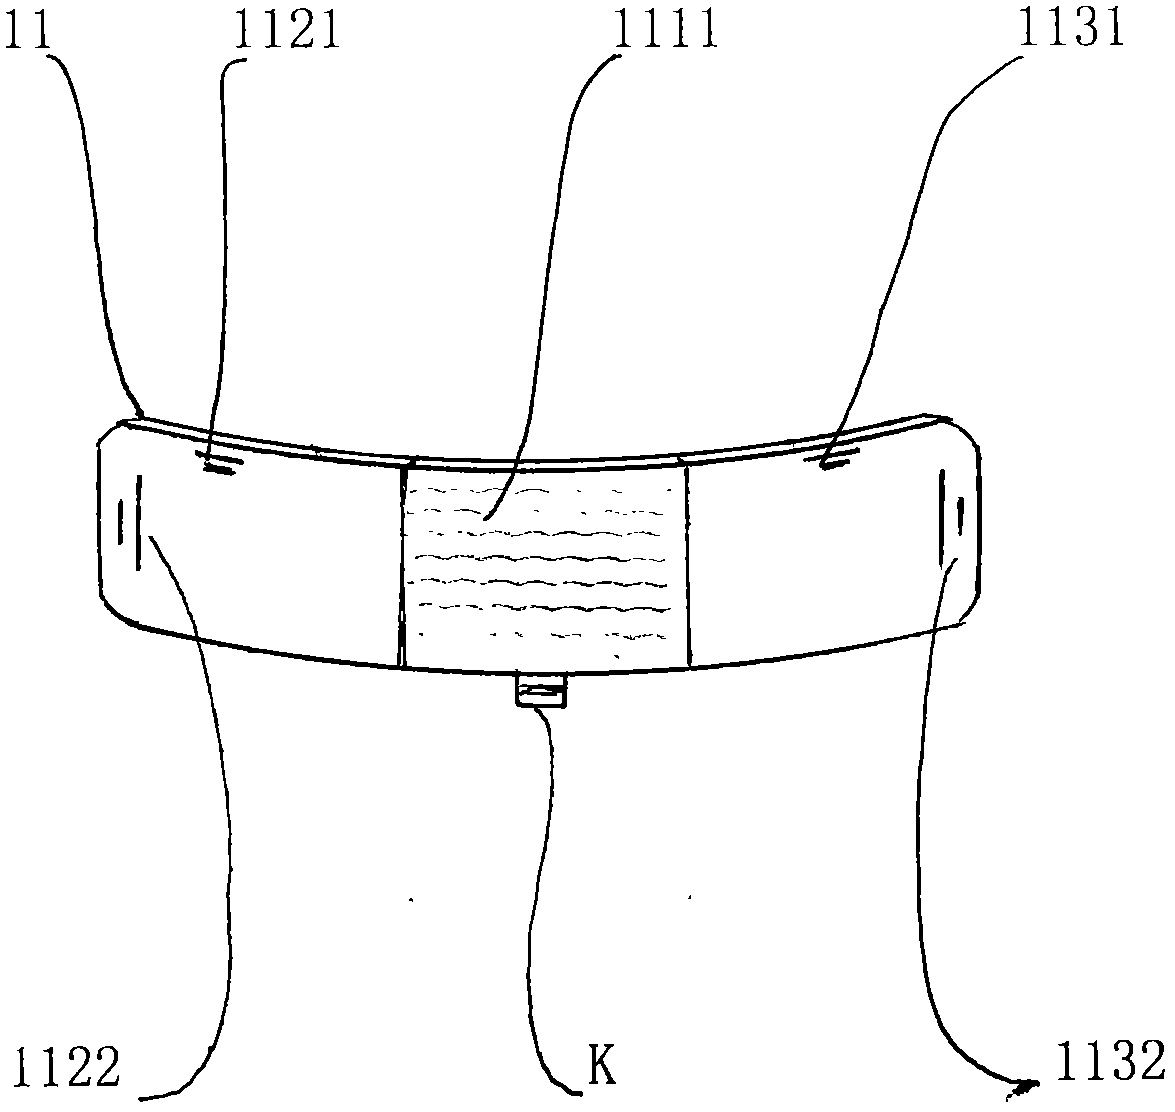 Spine arching waist and lumbar disc posterior protrusion jacking and load-bearing posture correction brace